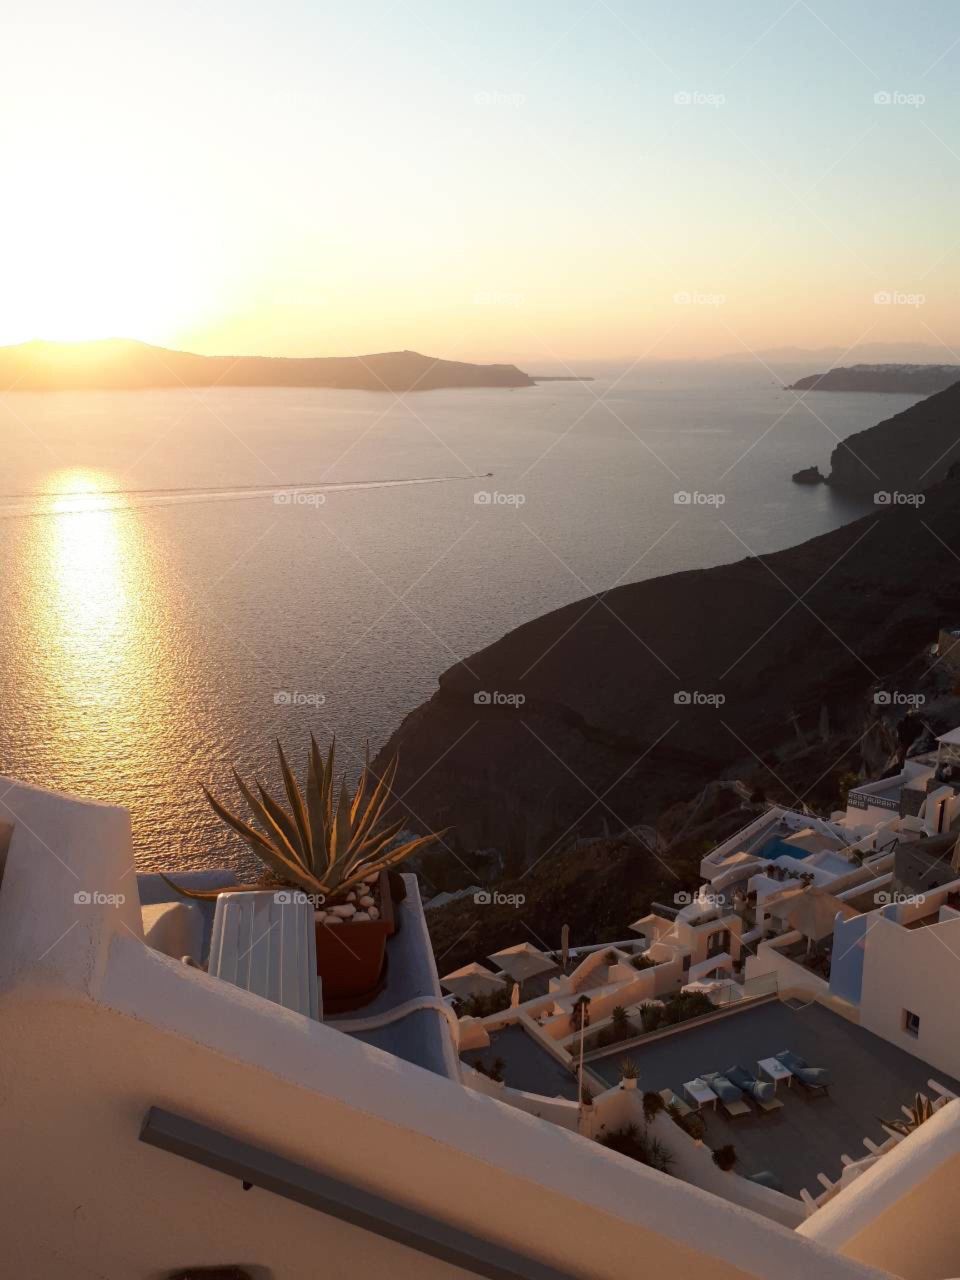 Sunset at the best balcony in the world. 
Beautiful sea. 
Golden sun. 
Panoramic scenery....